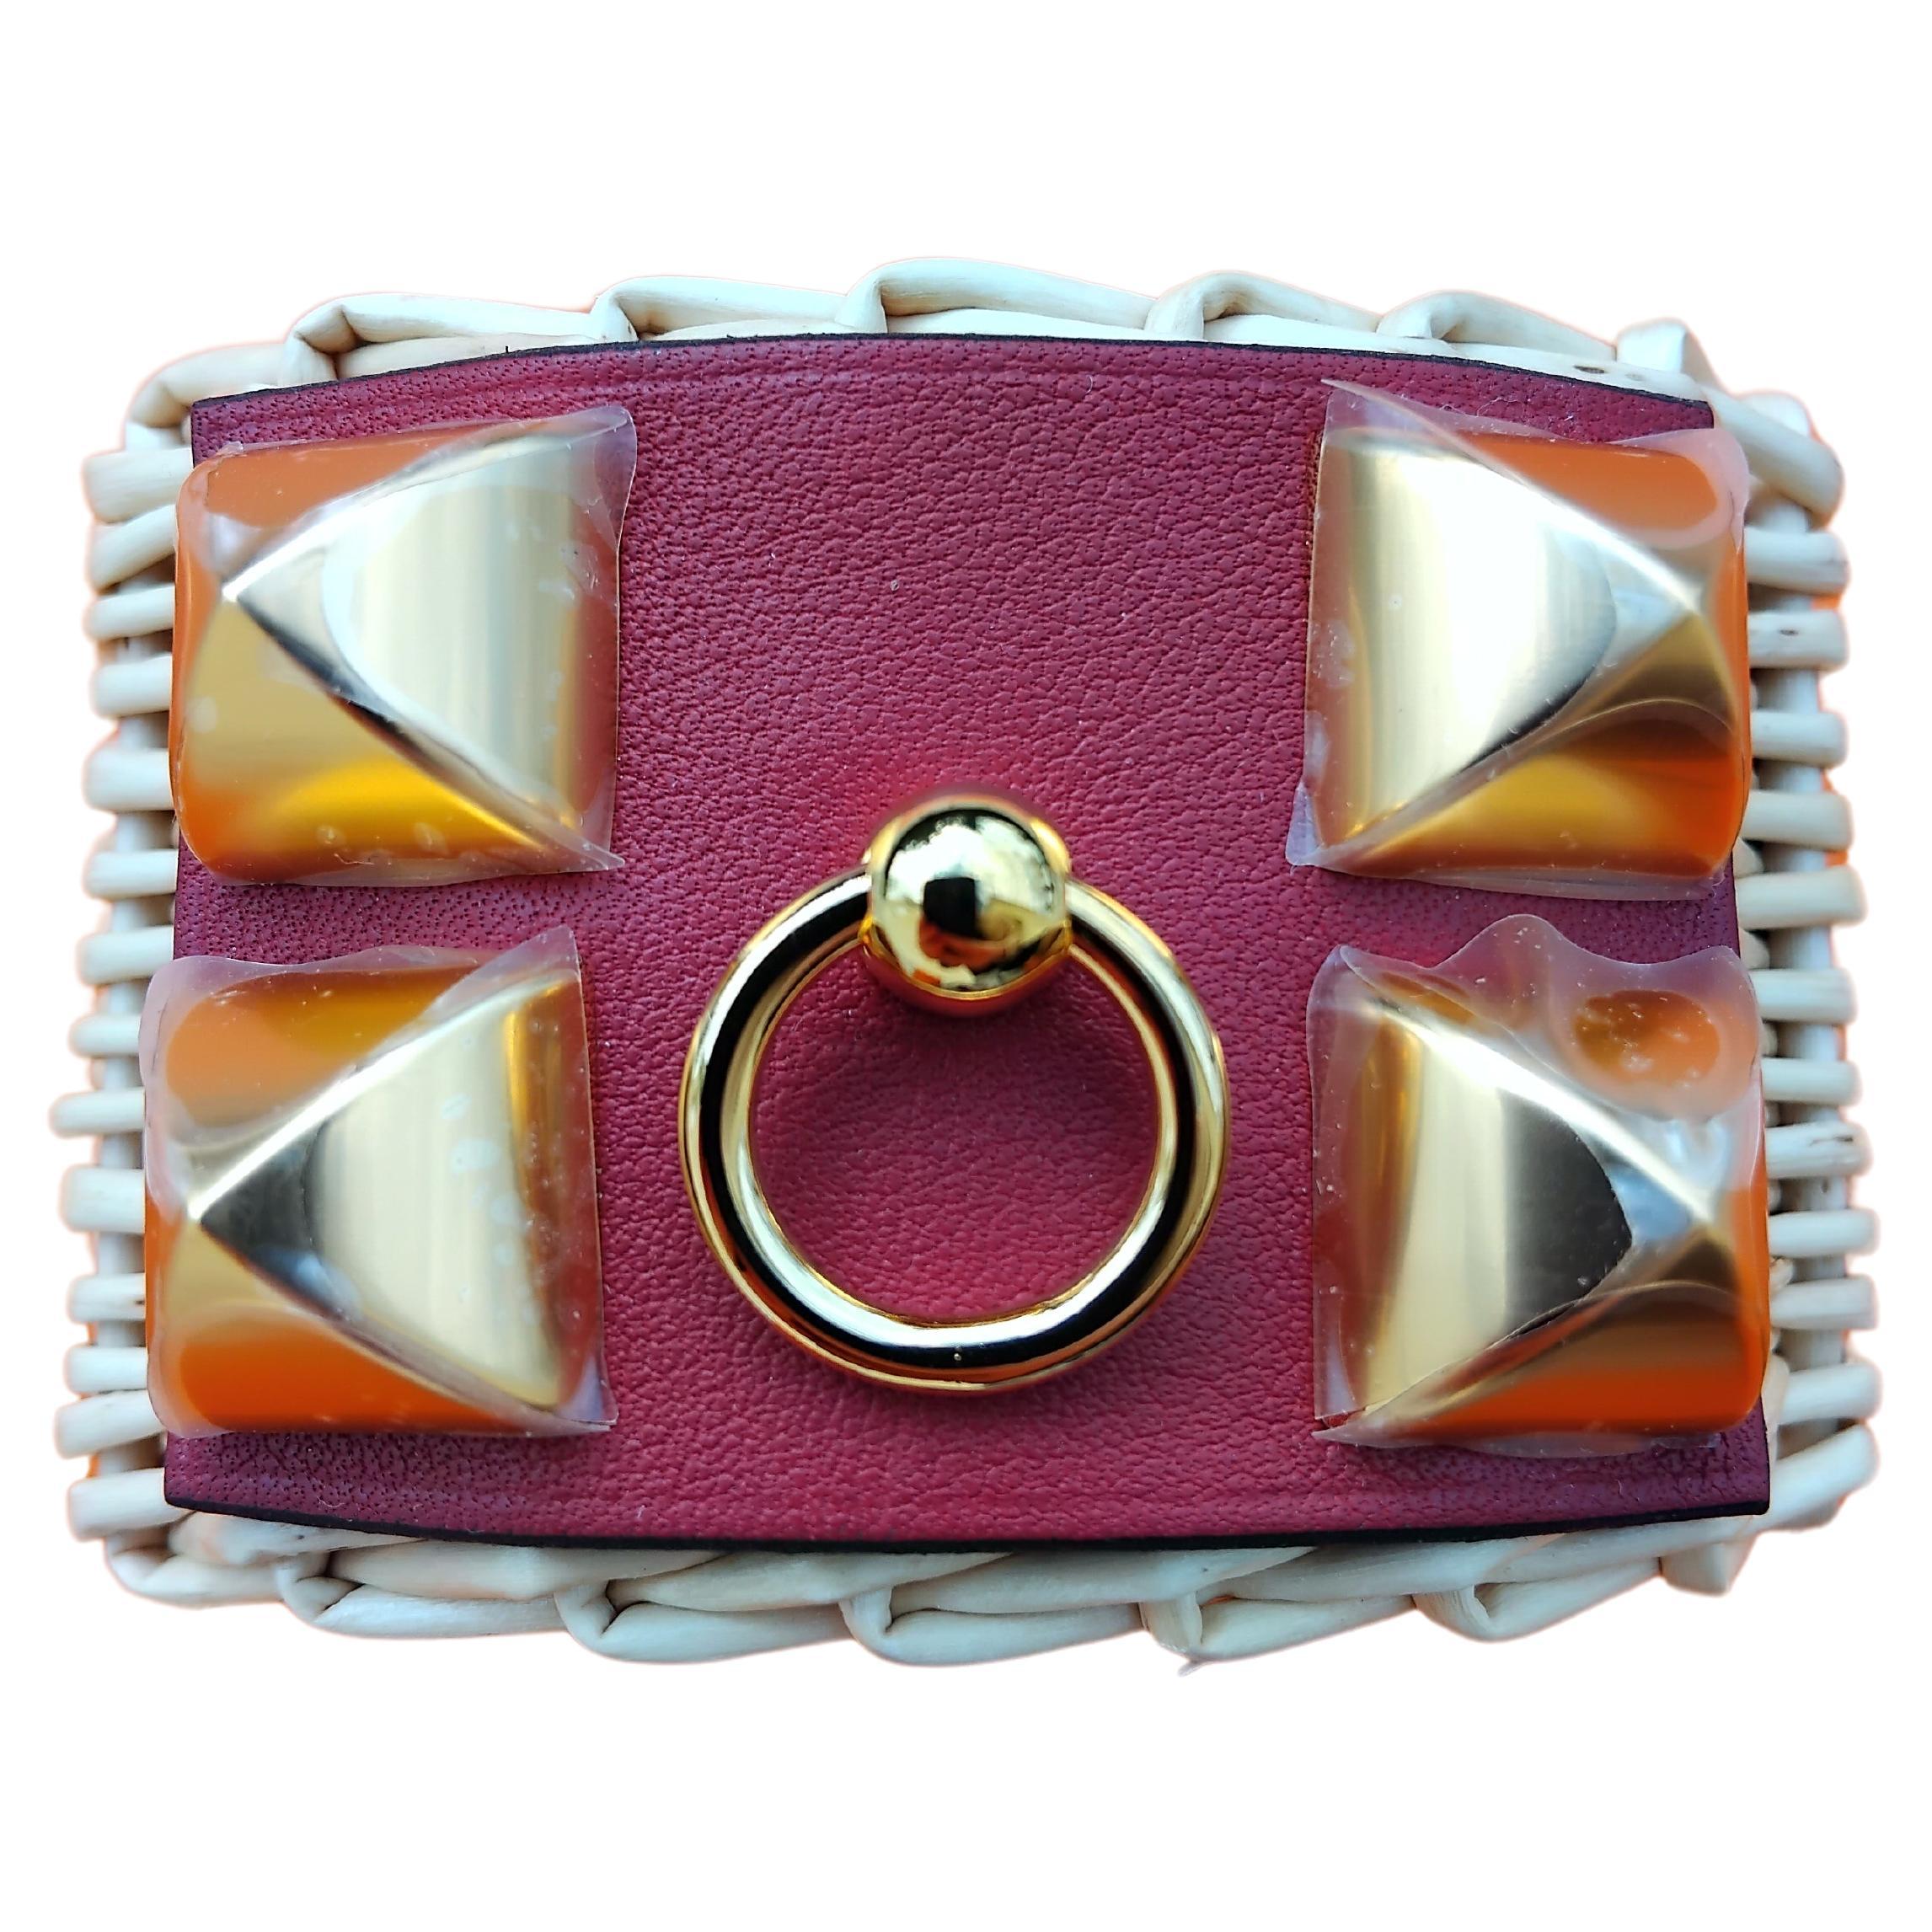 Gorgeous and rare color for this authentic Hermès Cuff

